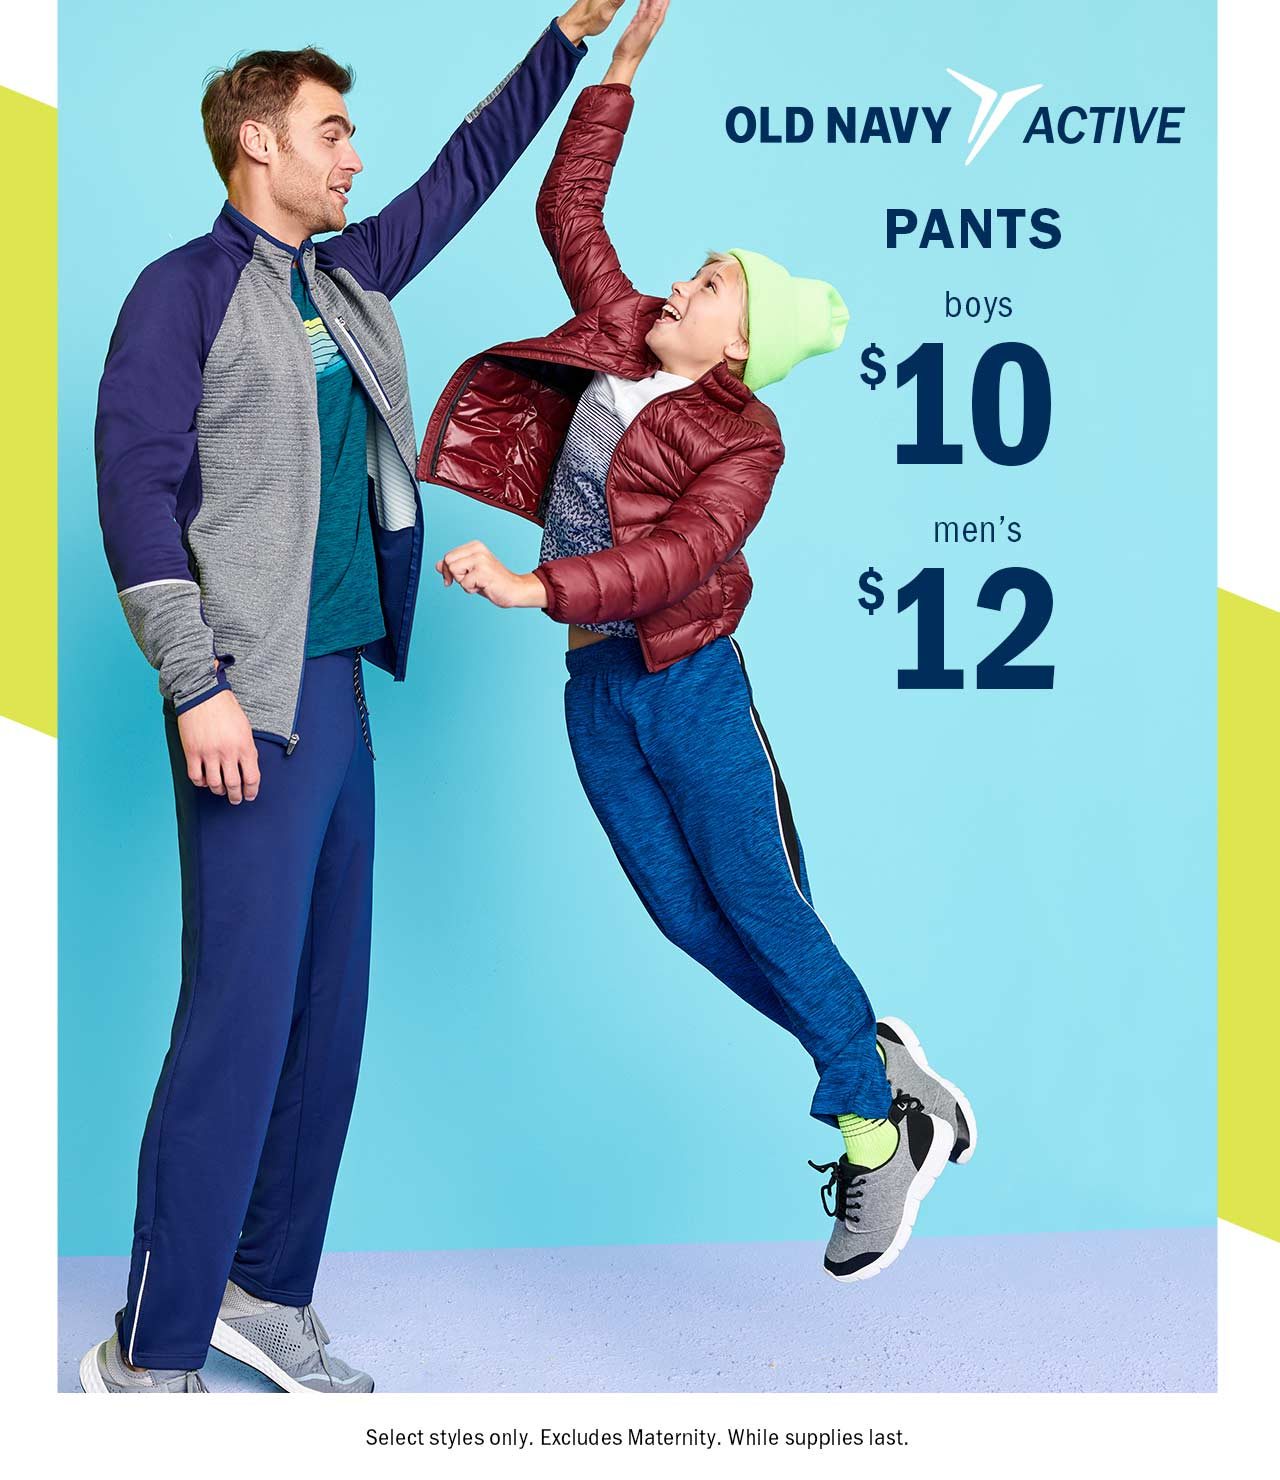 Old Navy active